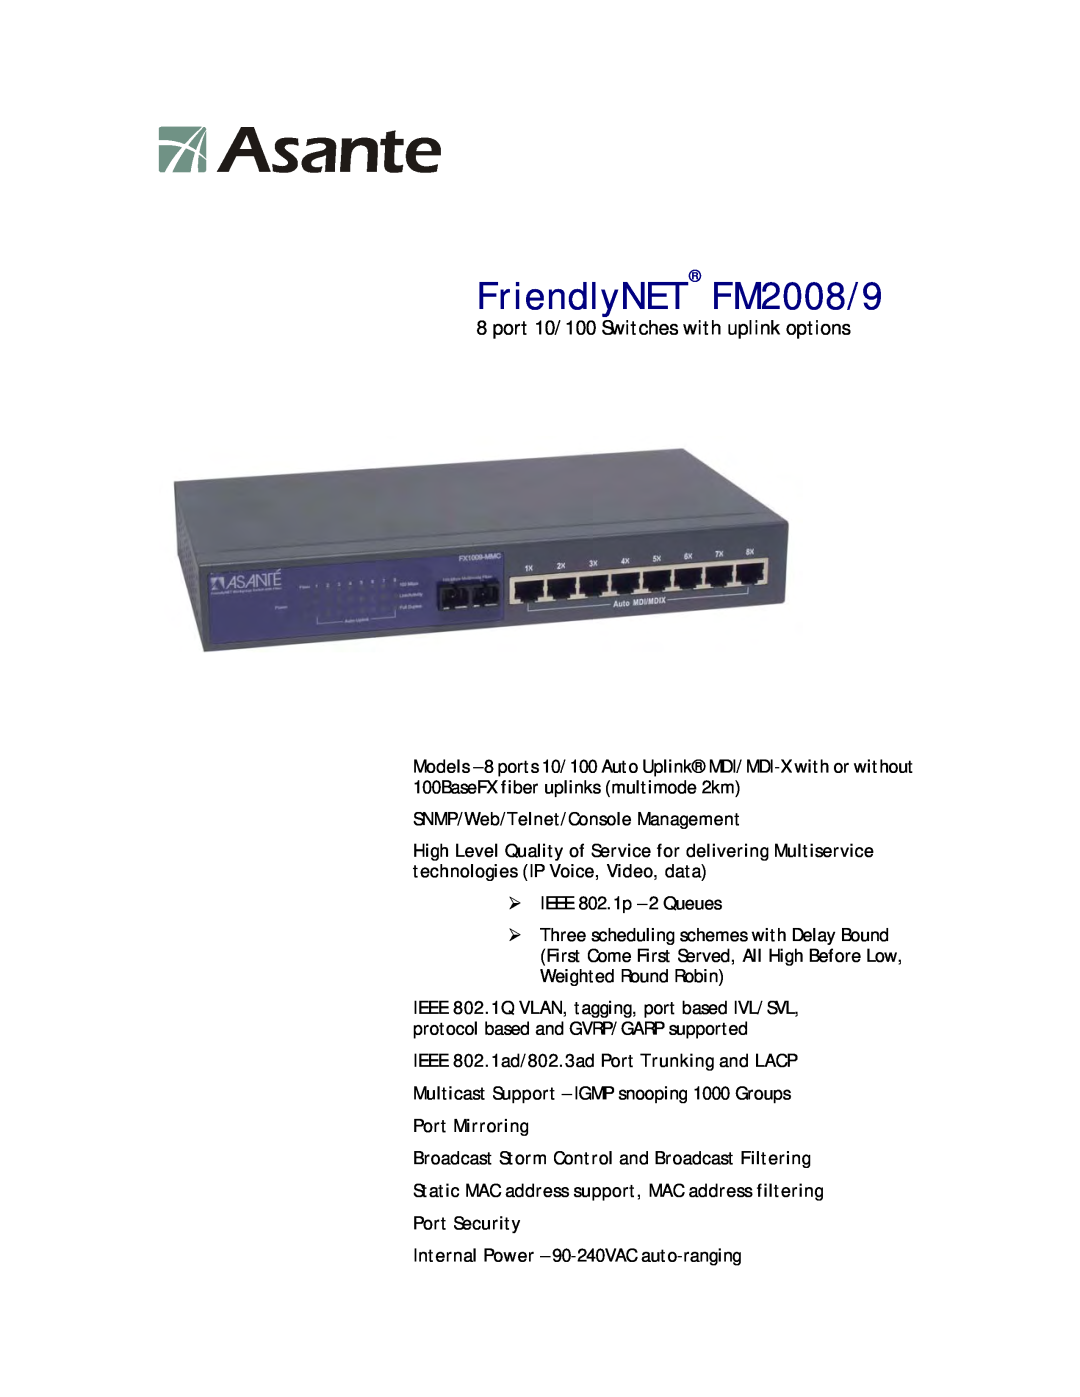 Asante Technologies manual FriendlyNET FM2008/9, port 10/100 Switches with uplink options 